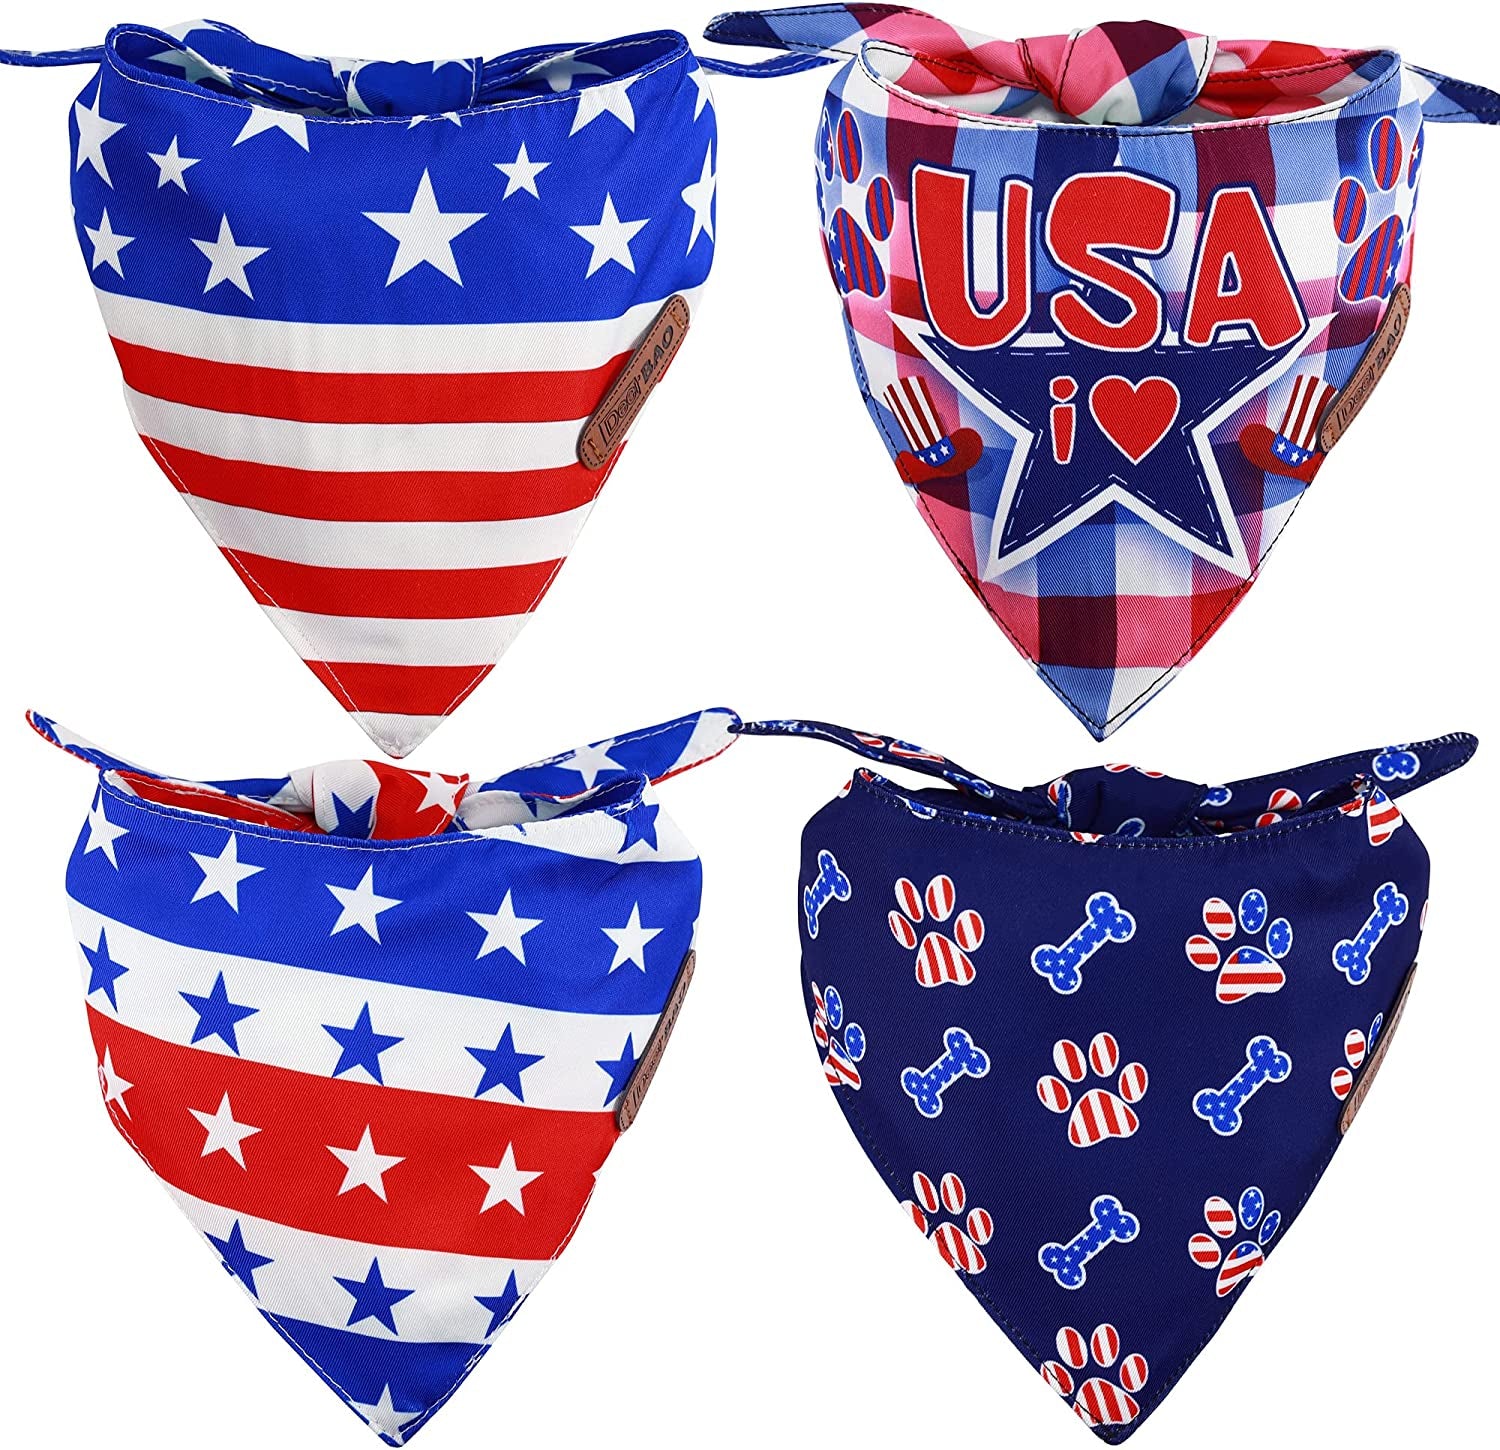 Deerbao Dog Bandanas 4Pack,Dog Scarf,Dog Bandanas Boygirl,Premium Durable Fabric,Adjustable Fit,Unique Shape,Suitable for All Kinds of Dogs,Provide Various Sizes (Large, Classic Plaid) Animals & Pet Supplies > Pet Supplies > Dog Supplies > Dog Apparel DeerBAO National Flag Large 